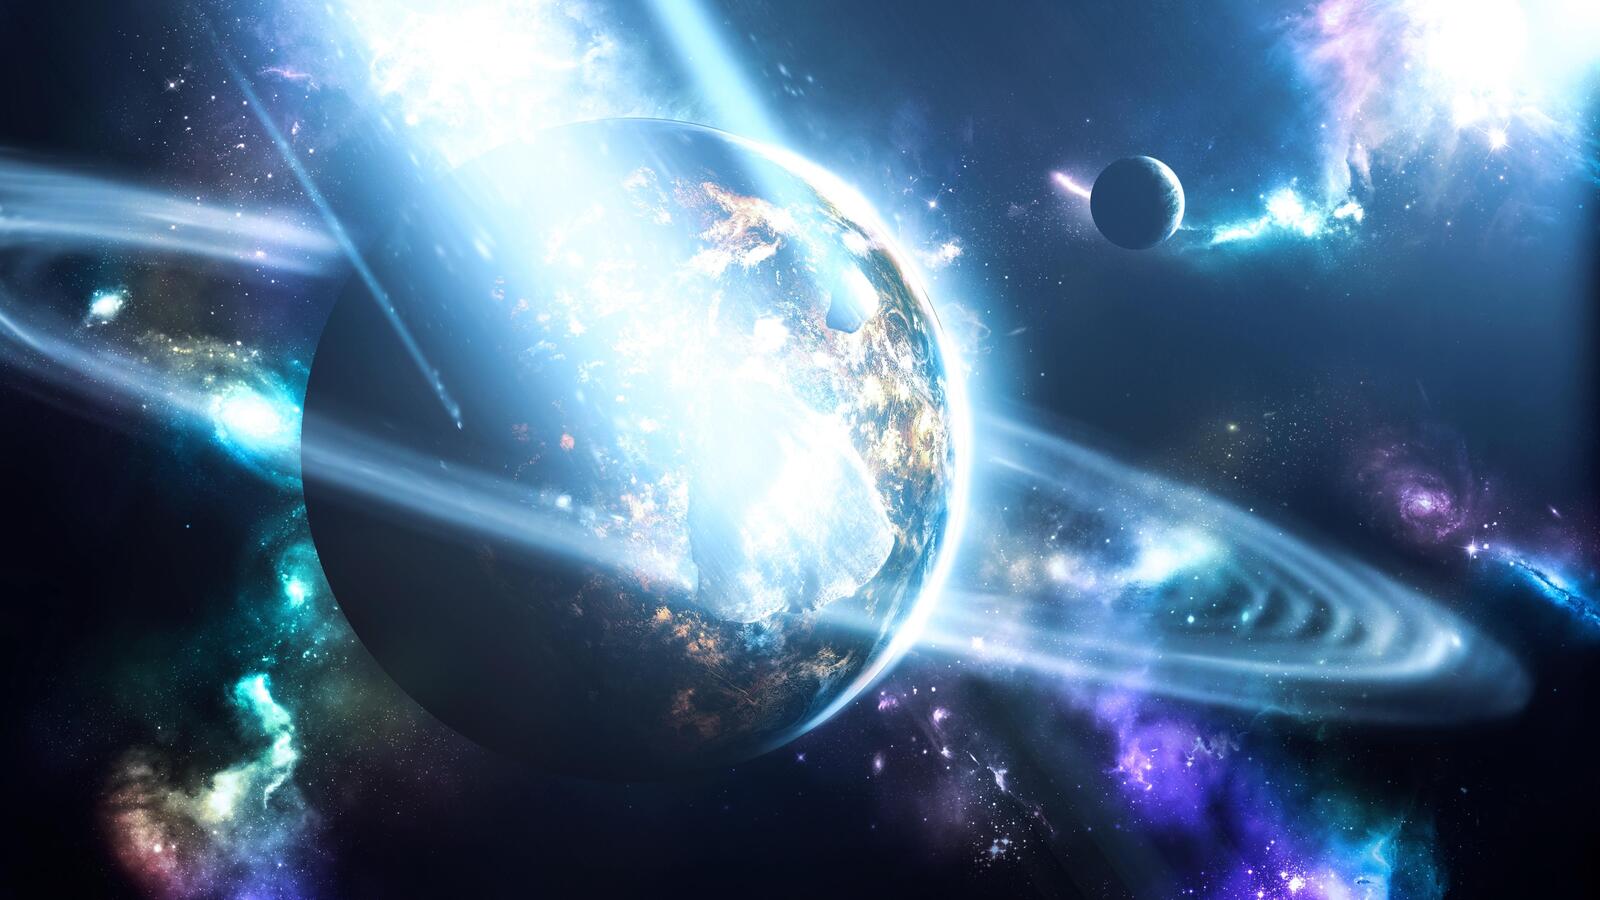 Wallpapers space light planets on the desktop